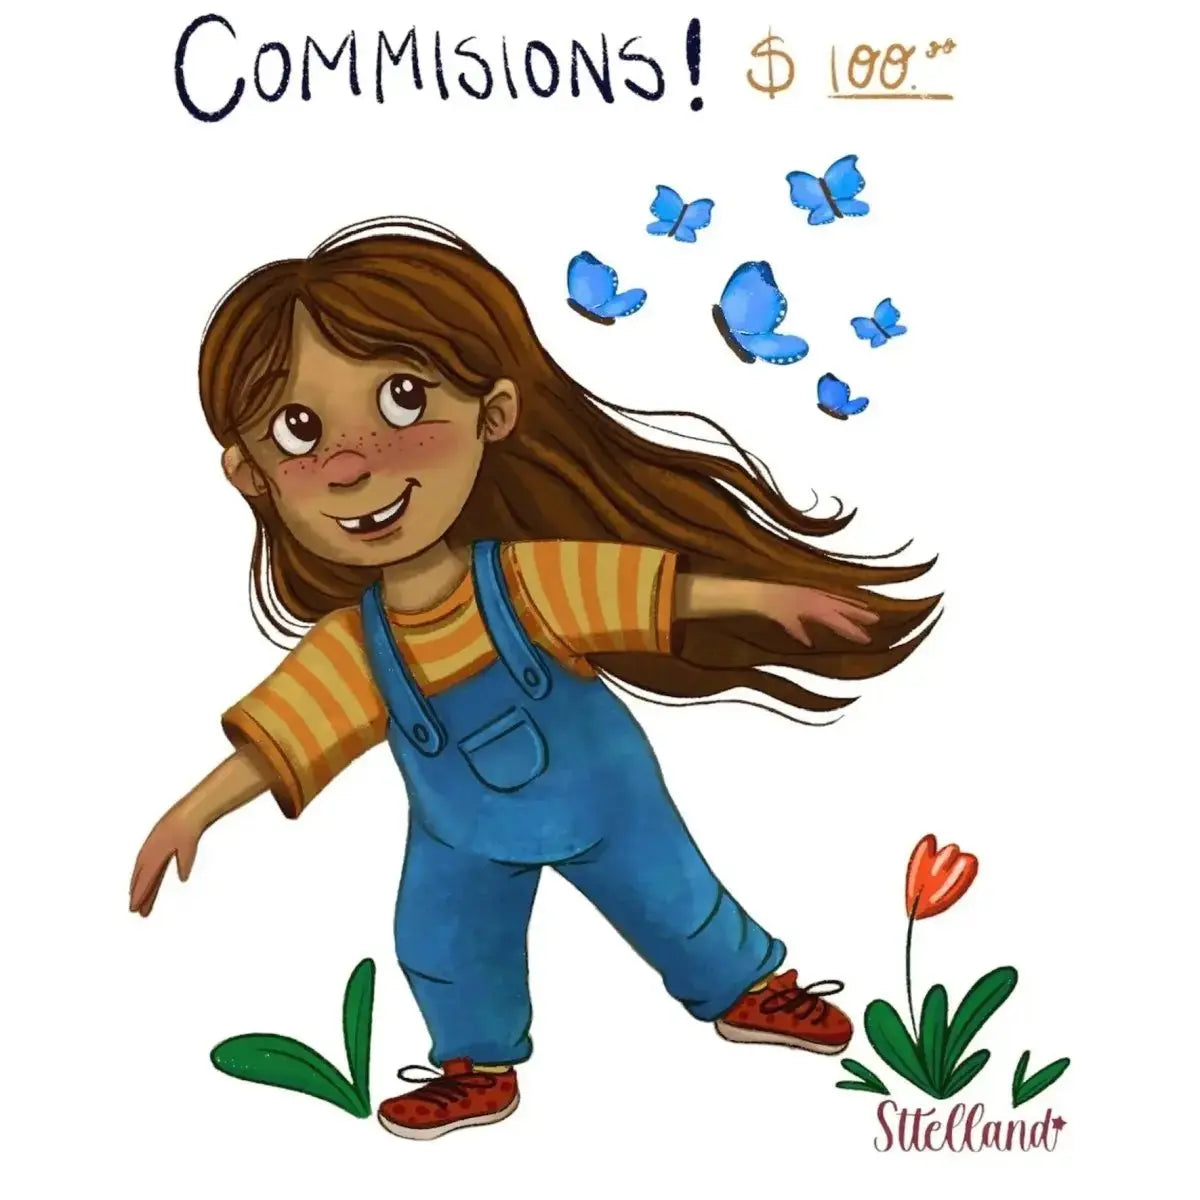 best, commission, commissions, custom, free, from, gift, illustration, illustrator, more, Original, profile, project, shipping, social, sttelland, want, Facial expression, Smile, Happy, People in nature, Plant, Gesture, Fictional character, Font, Illustration, Cartoon